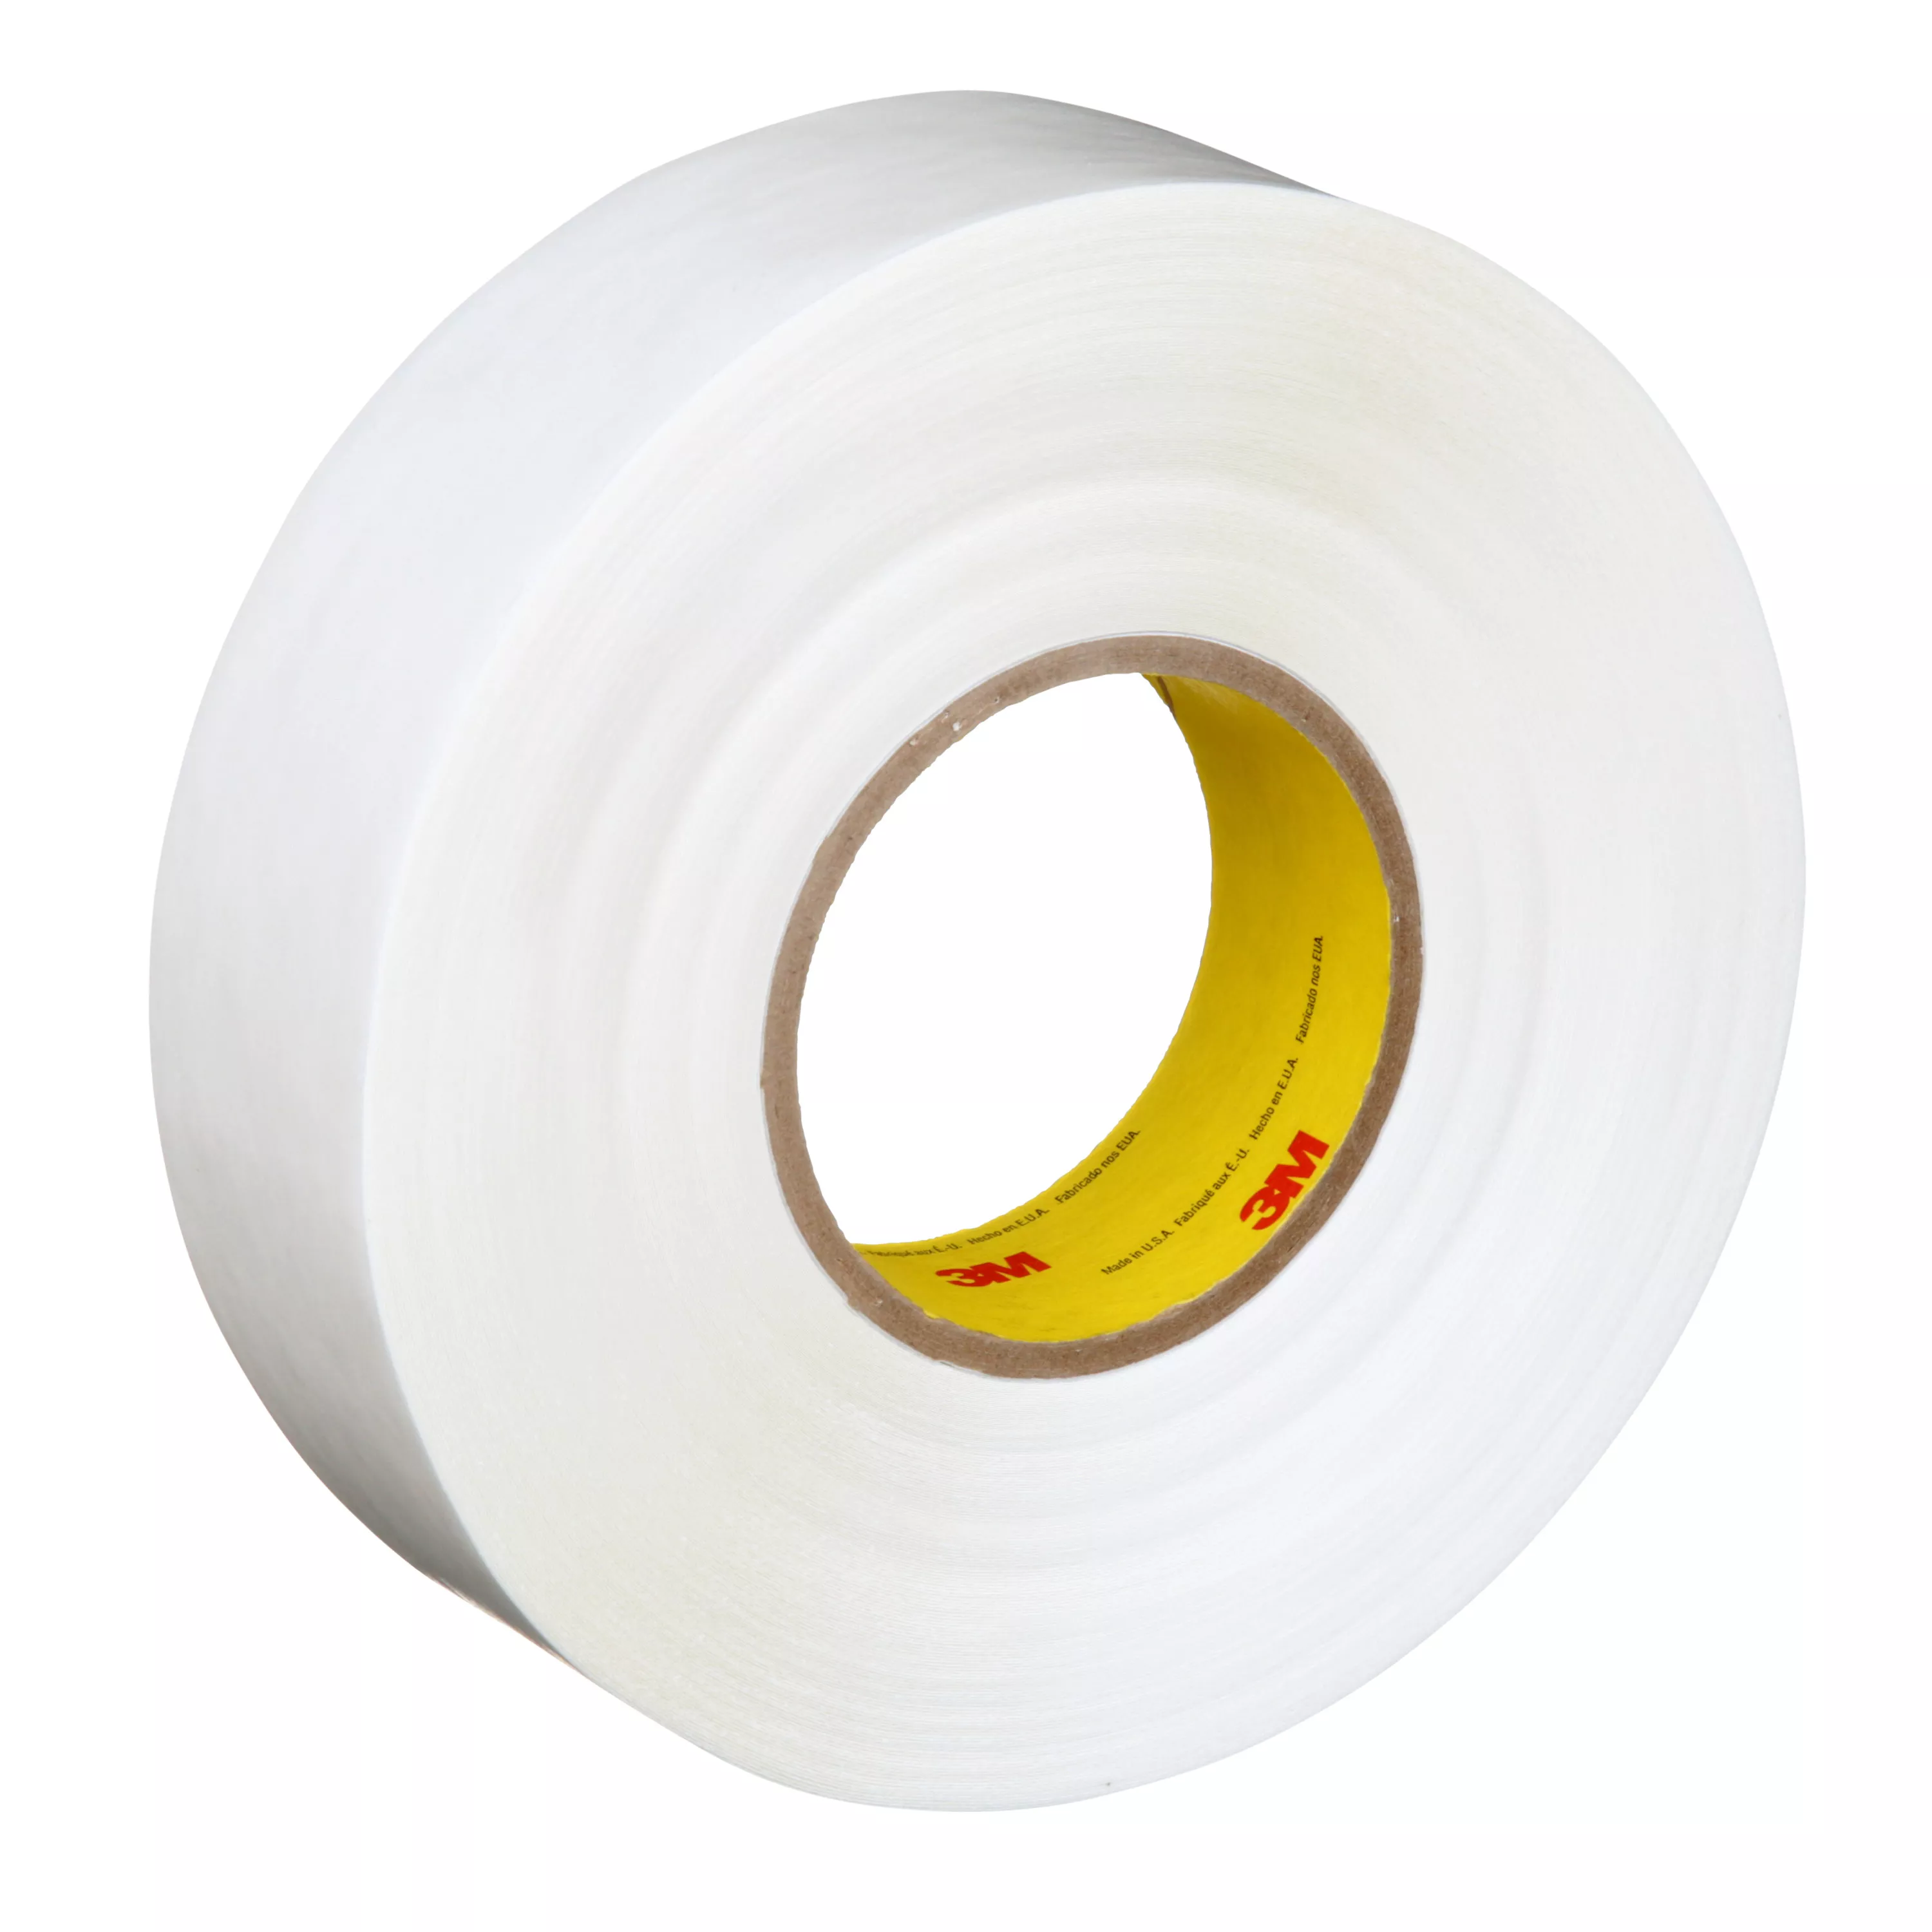 3M™ Double Coated Tape 9579, White, 1 1/2 in x 360 yd, 9 mil, 6
Roll/Case